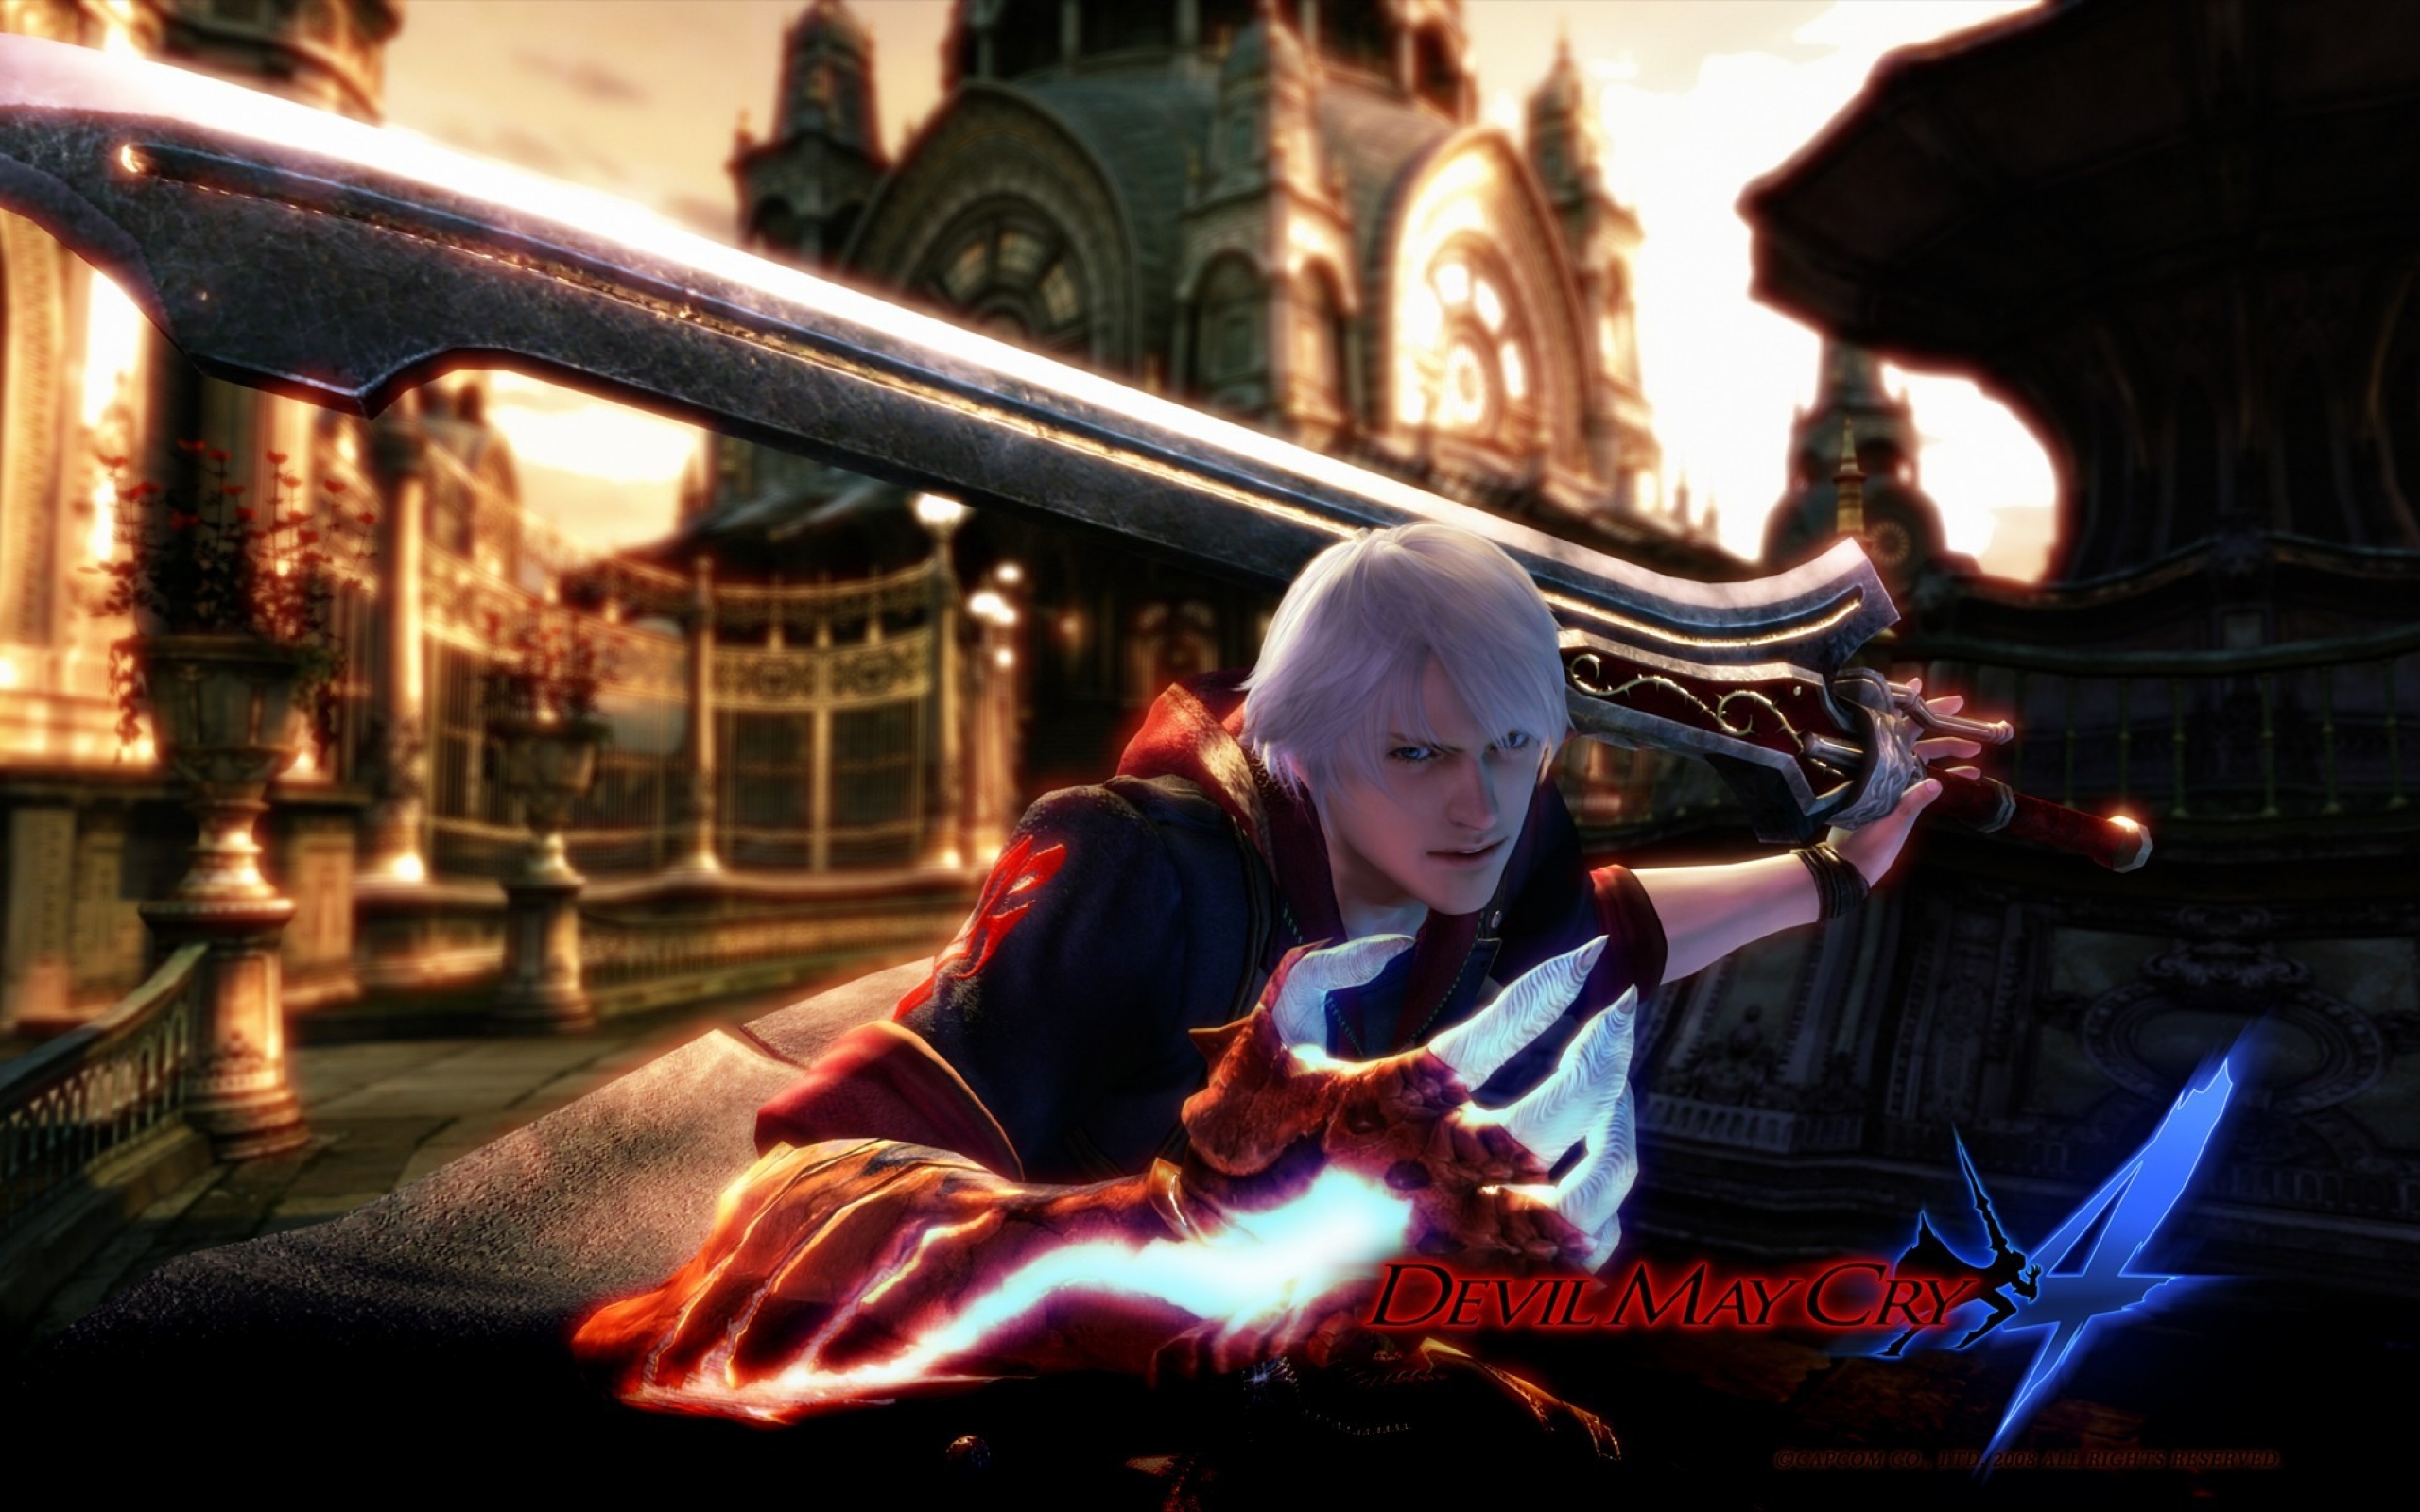 Devil May Cry 4 wallpapers Devil May Cry 4 stock photos